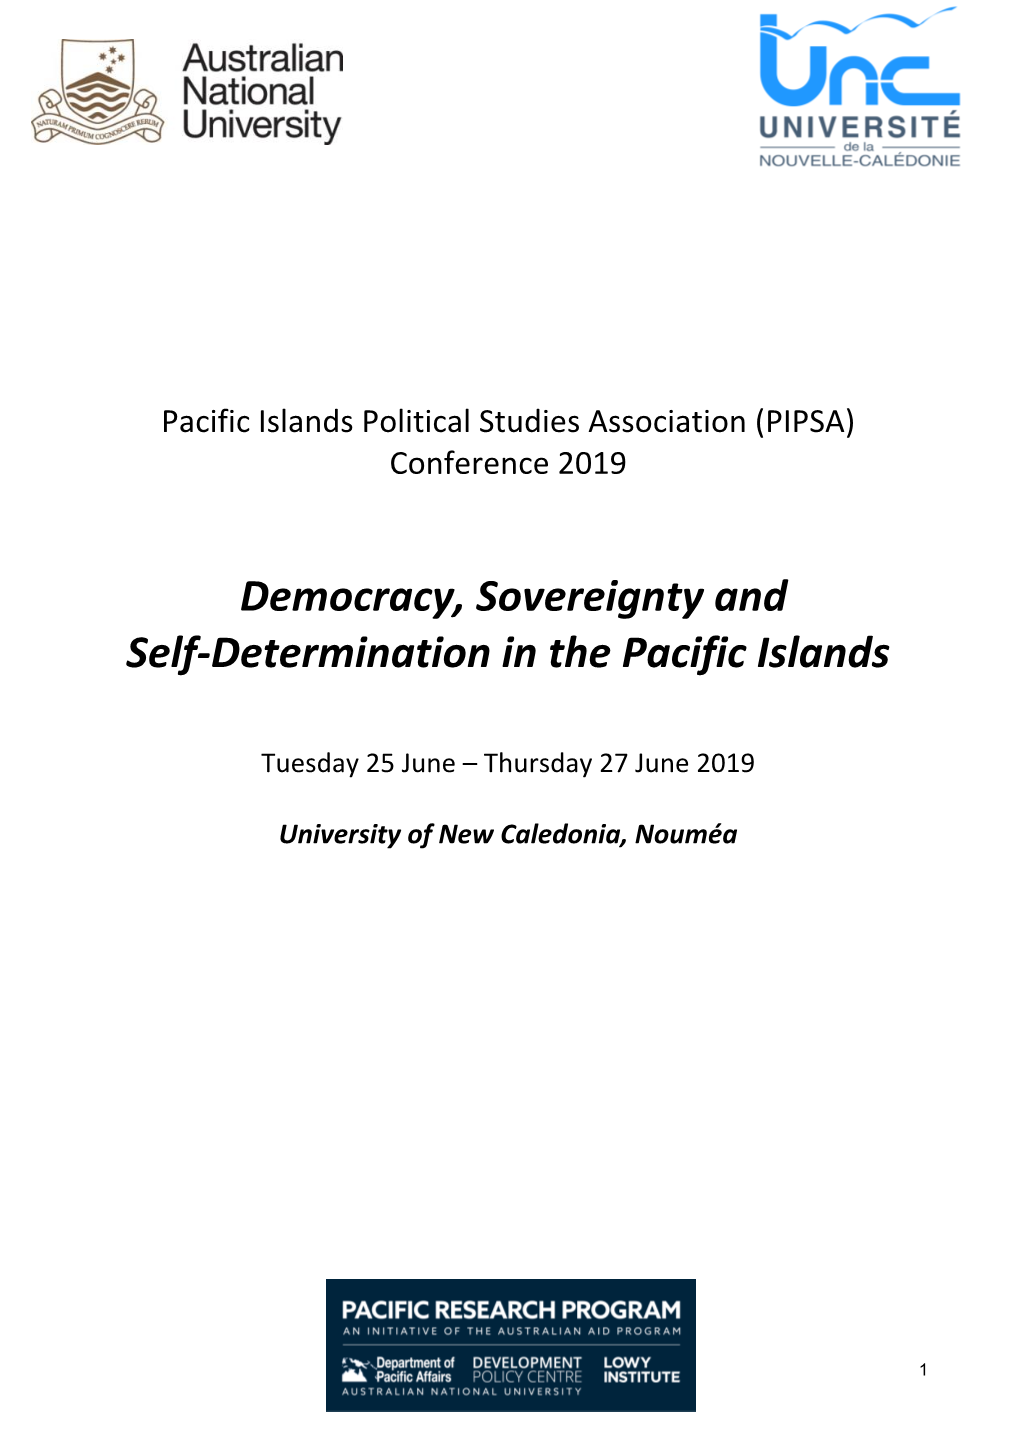 Democracy, Sovereignty and Self-Determination in the Pacific Islands